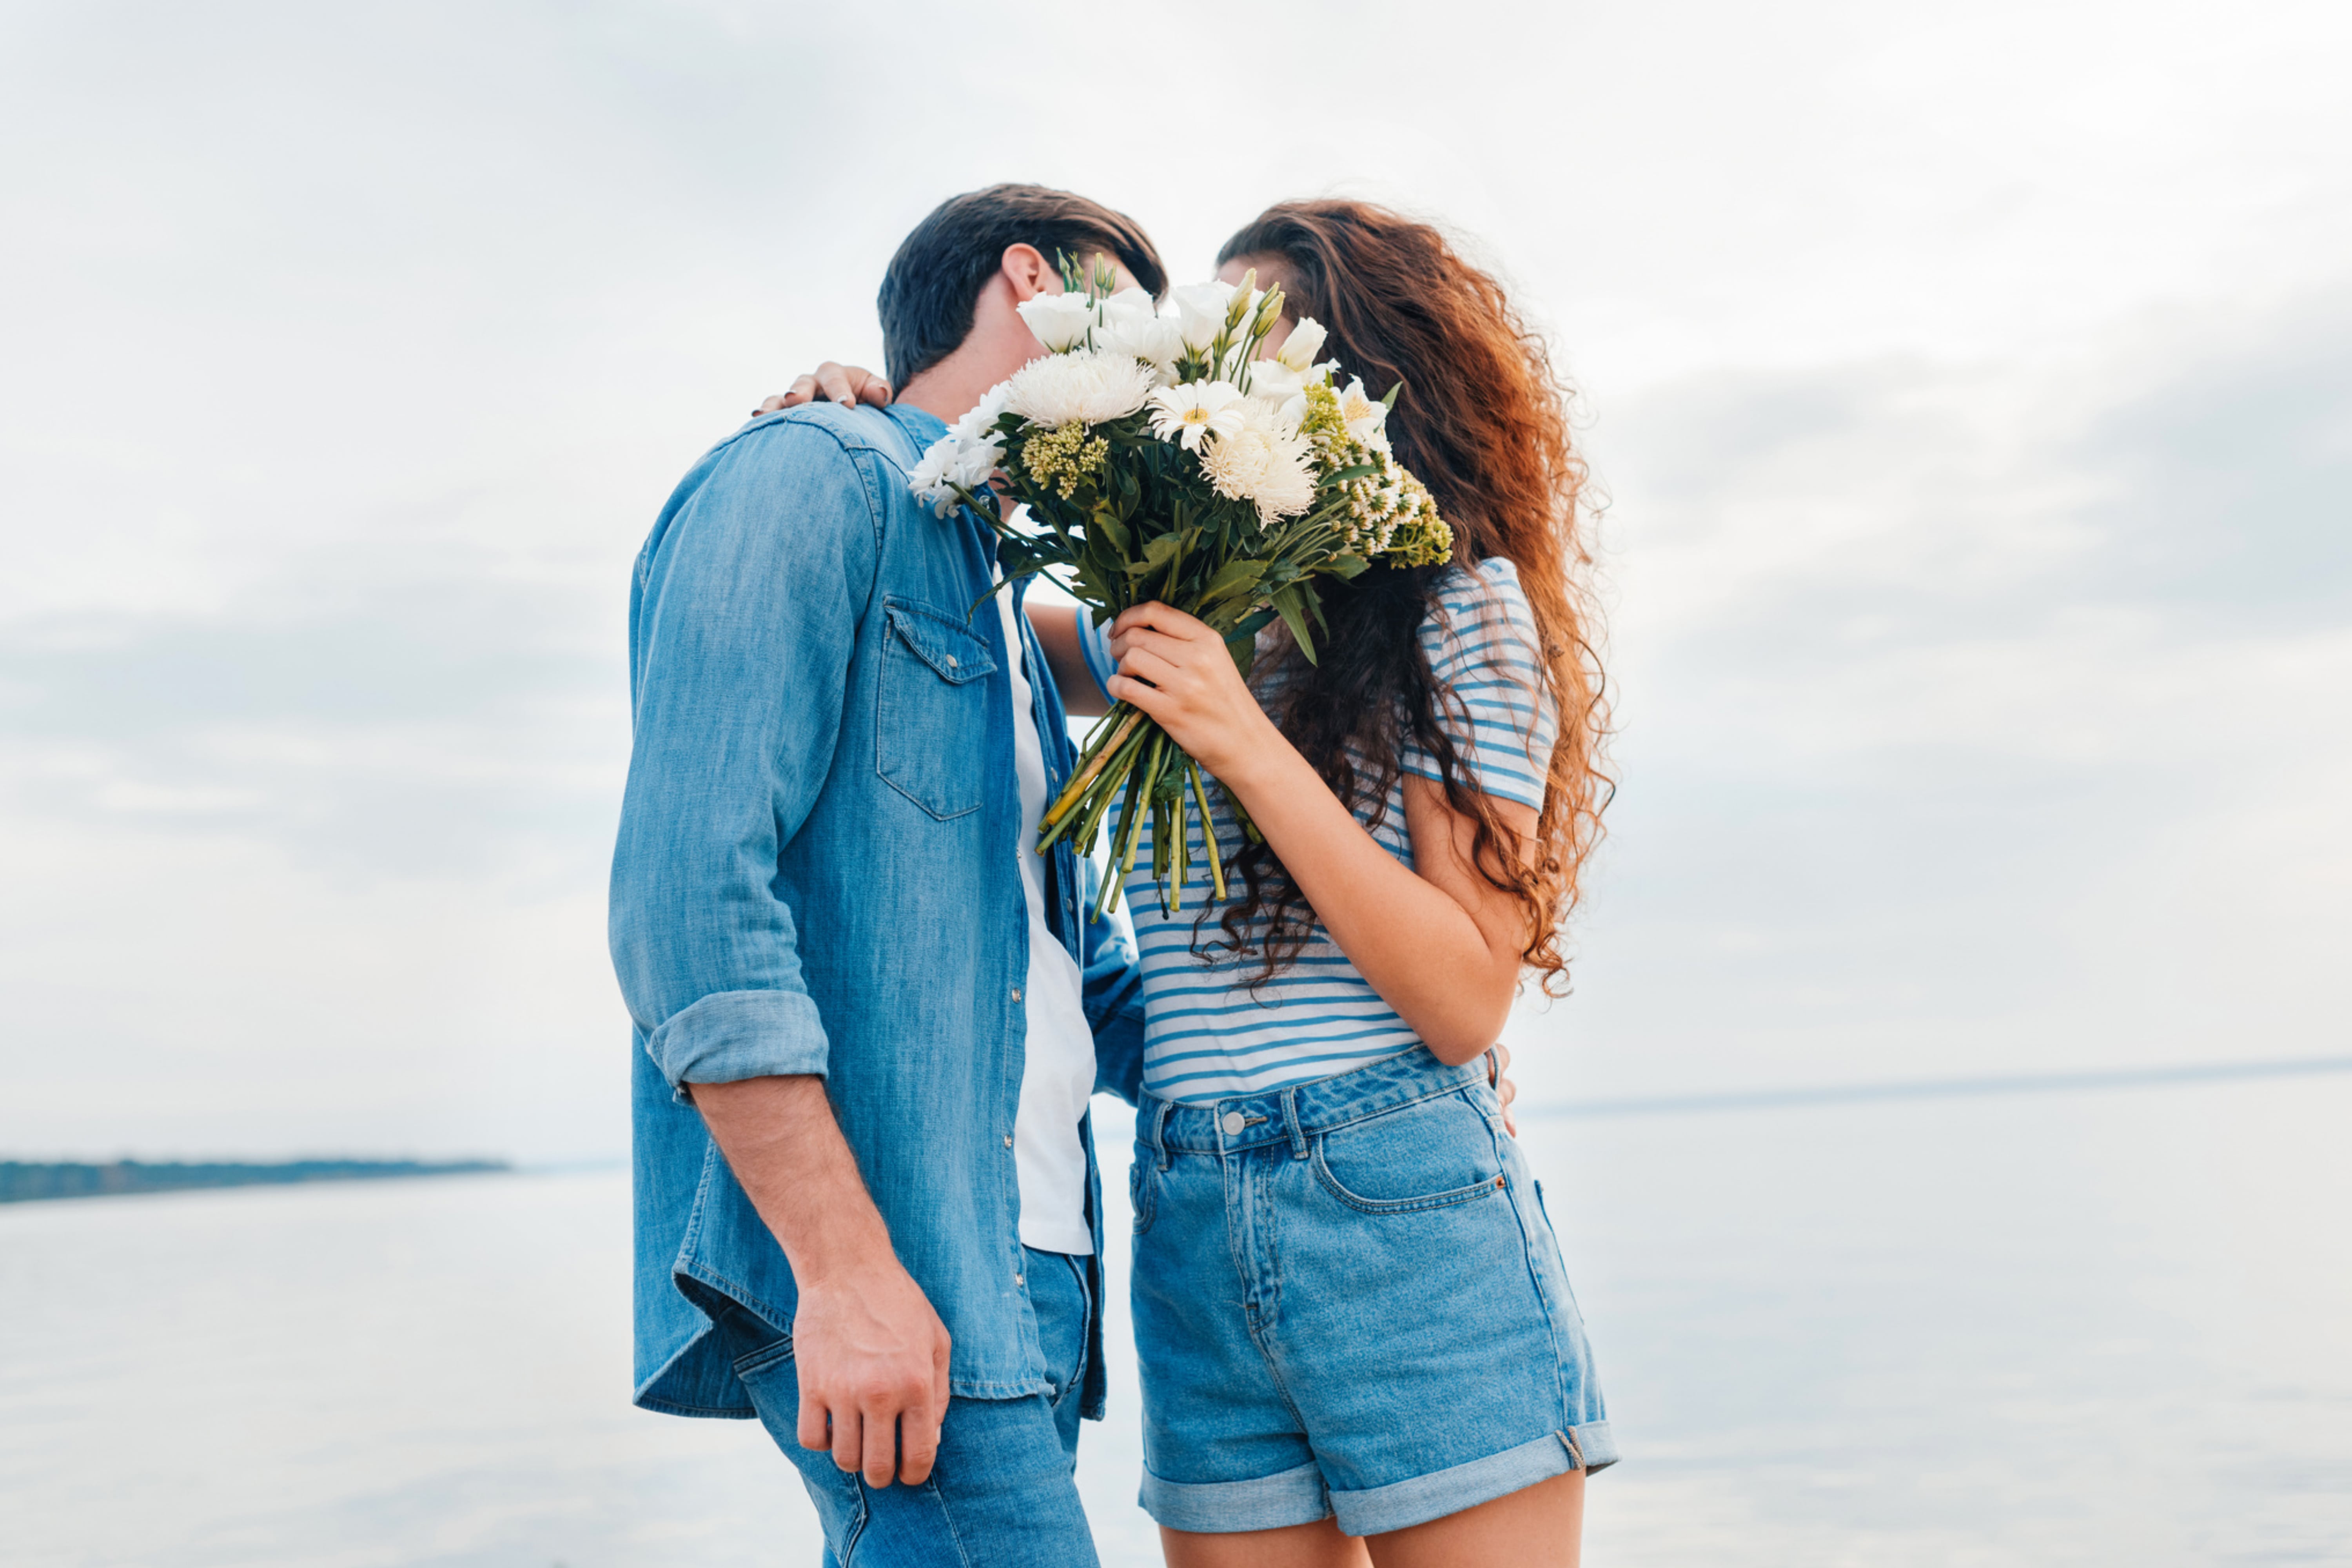 6 Use it or Lose Secrets. How to Be Independent in a Relationship